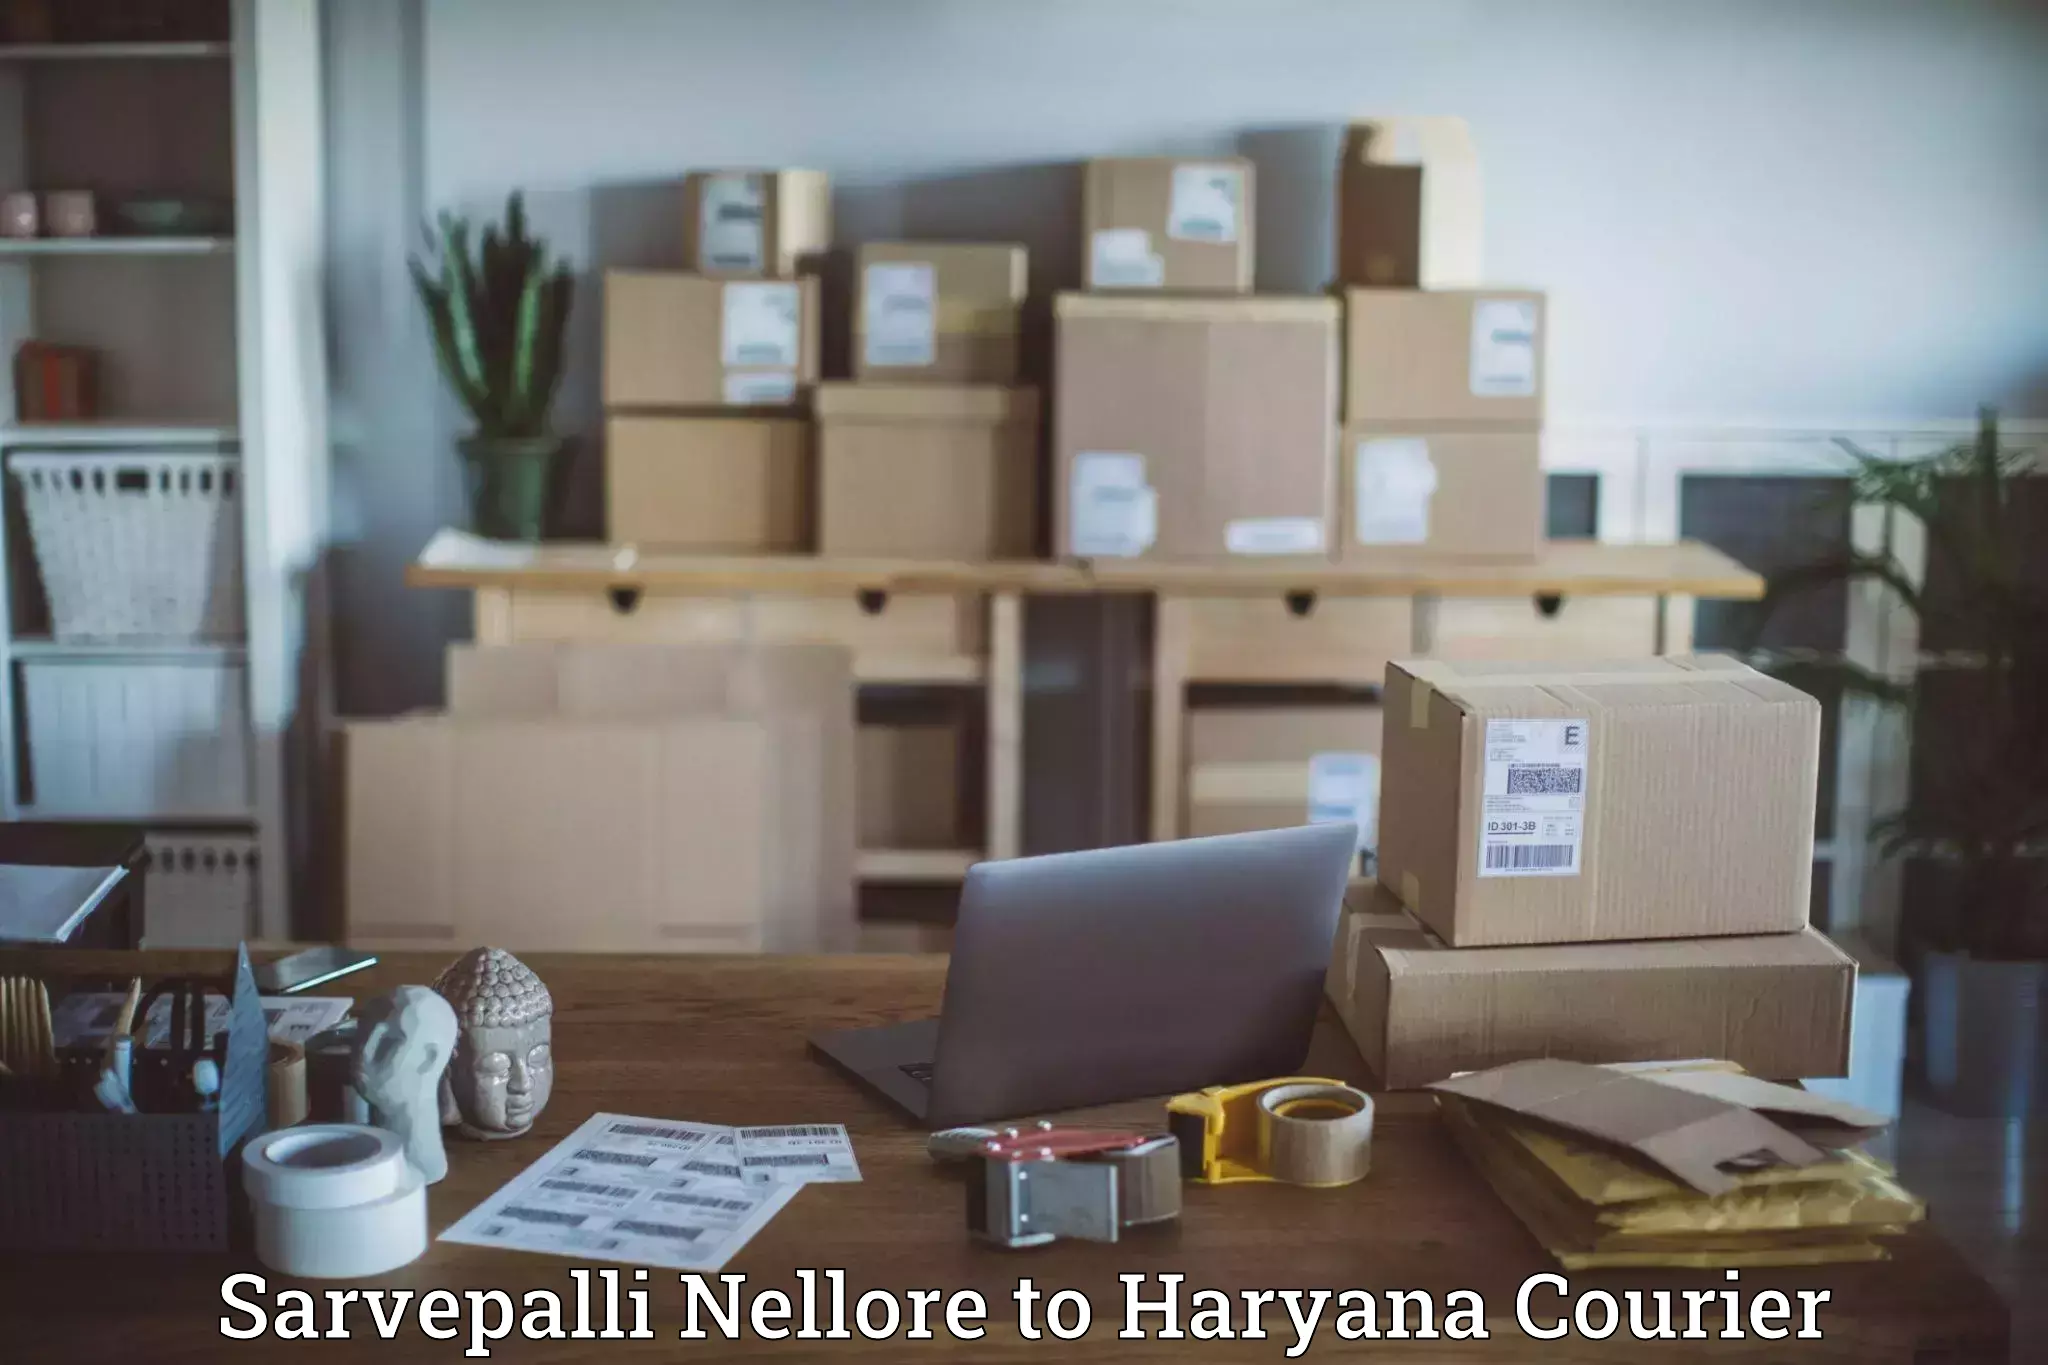 Express mail solutions Sarvepalli Nellore to Gurgaon